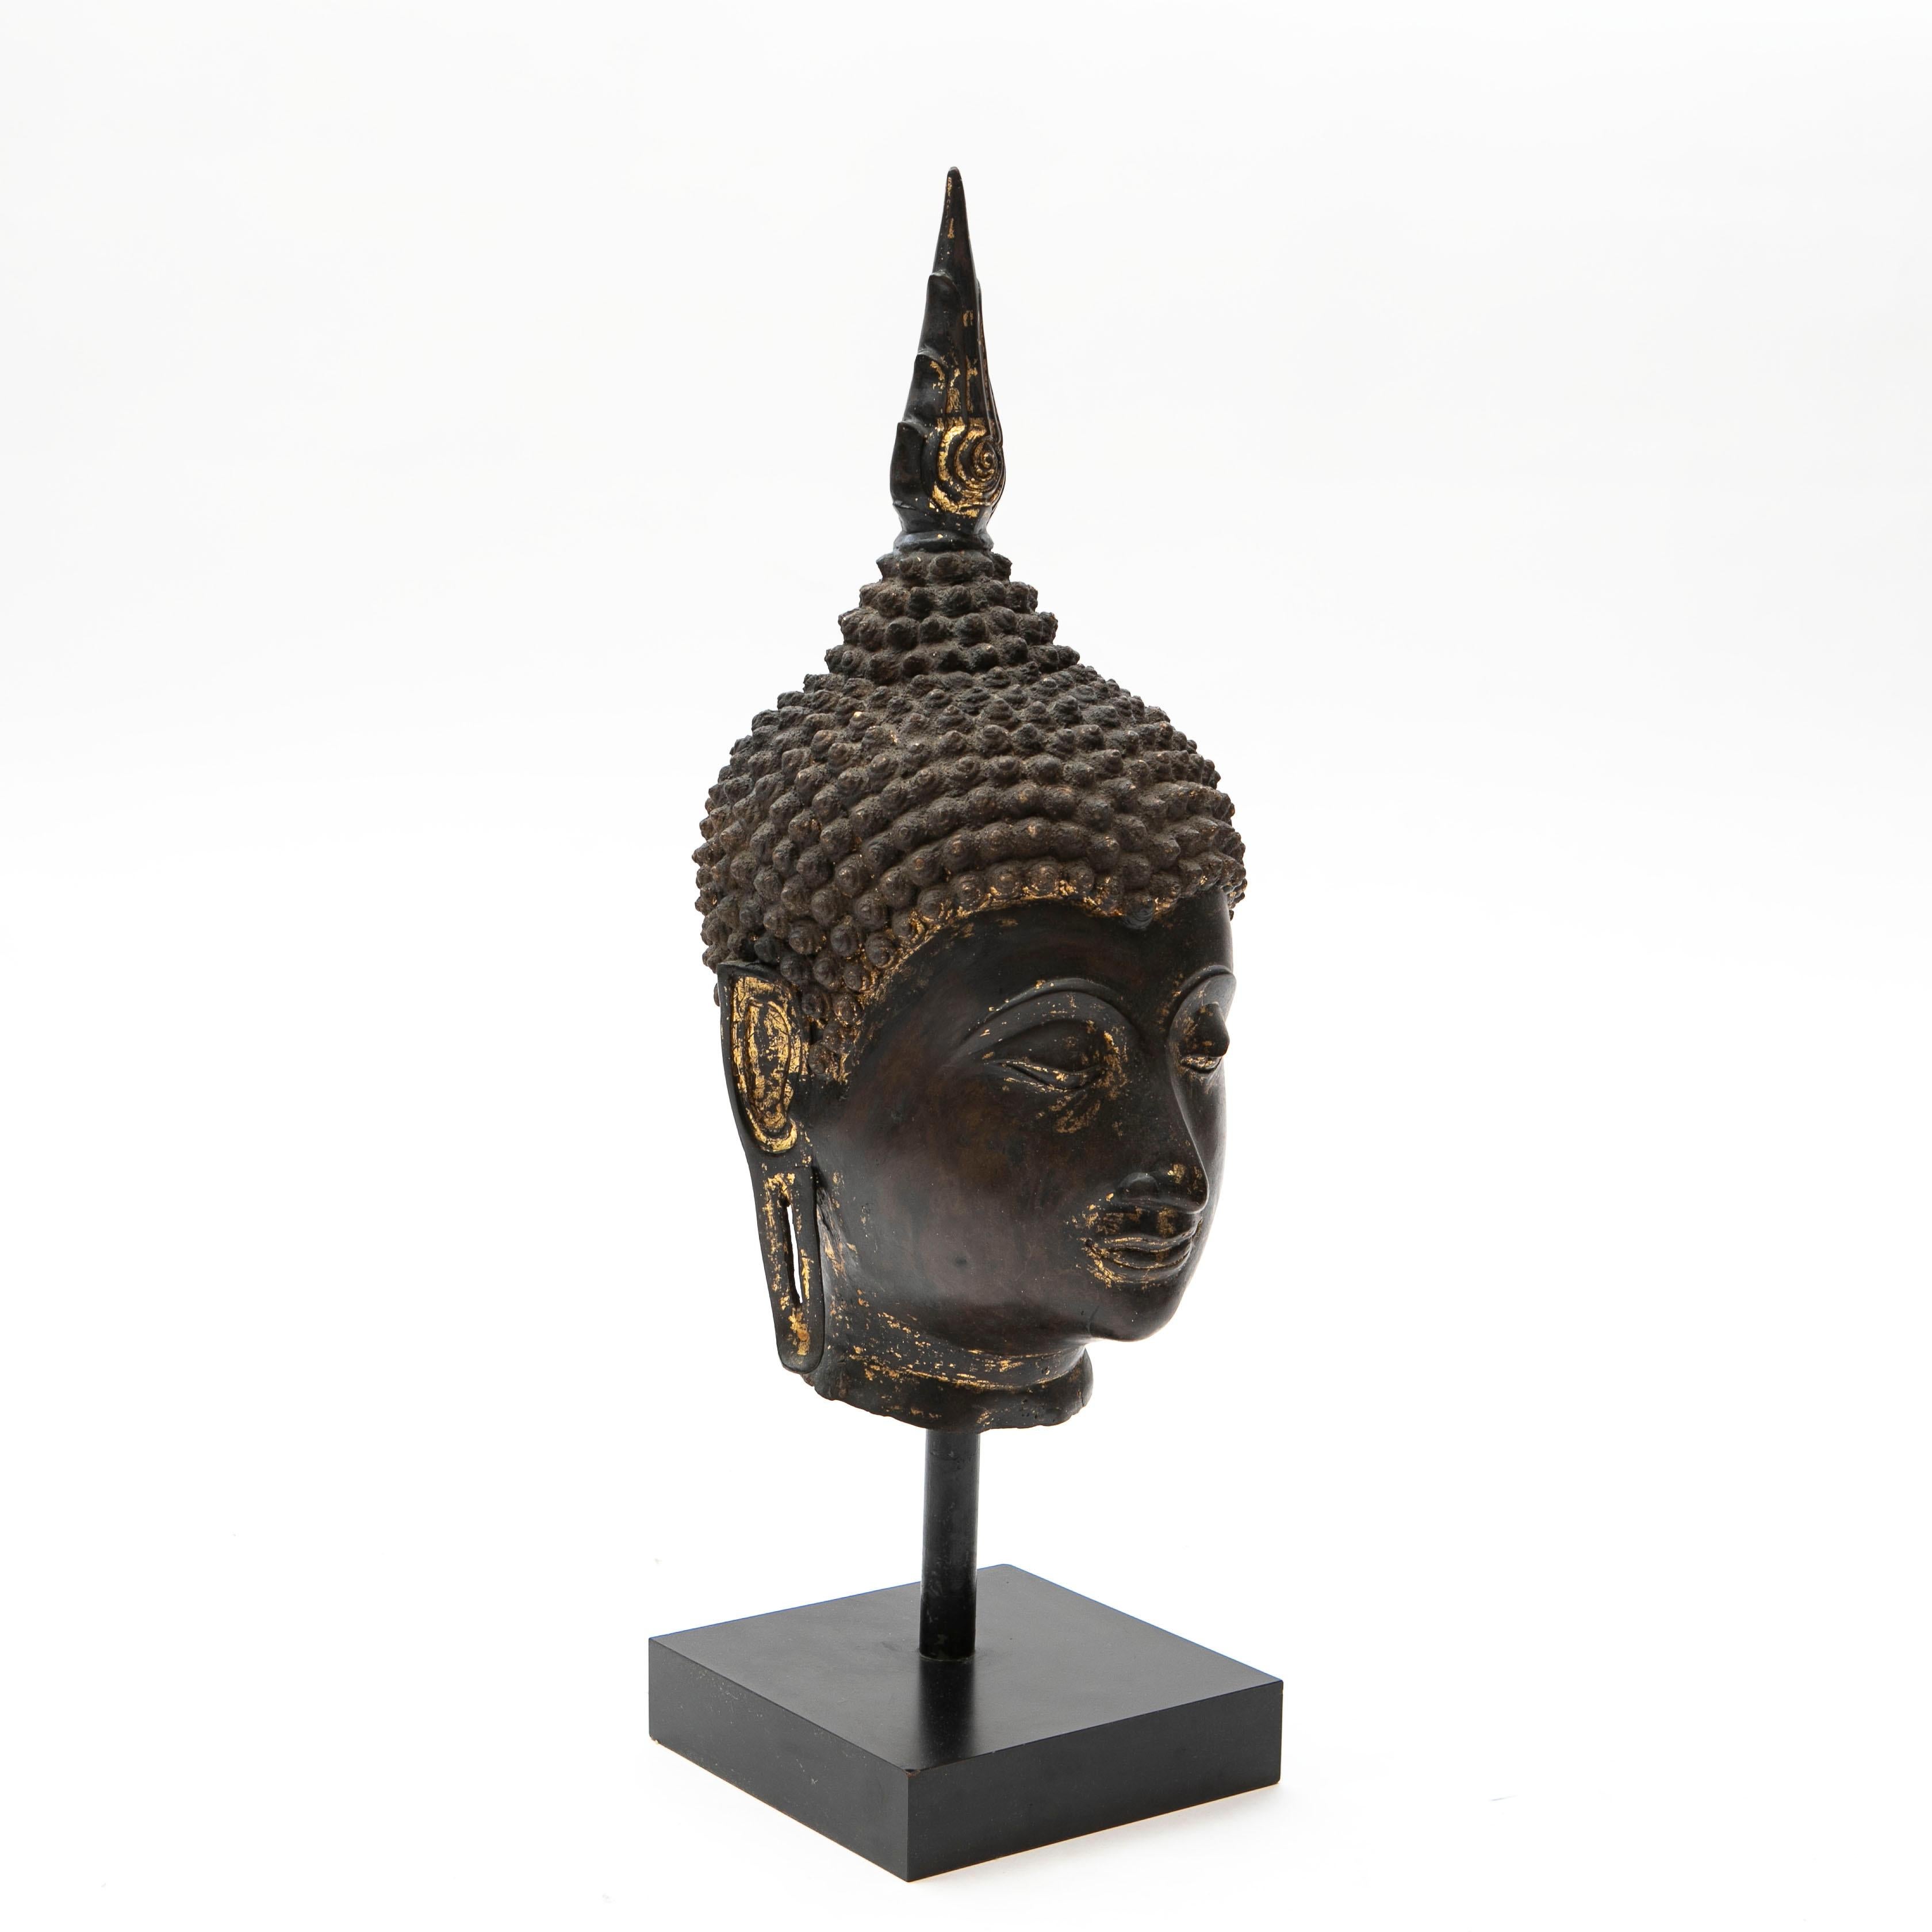 Thai bronze head of a Buddha with some of the original gilding still remaining.
Mounted on a black painted metal stand.

Height incl. stand: 78 cm / 30.7 inch.  Height excl. stand: 60 cm / 23.6 inch.

Thailand (Siam), approx. 1900.